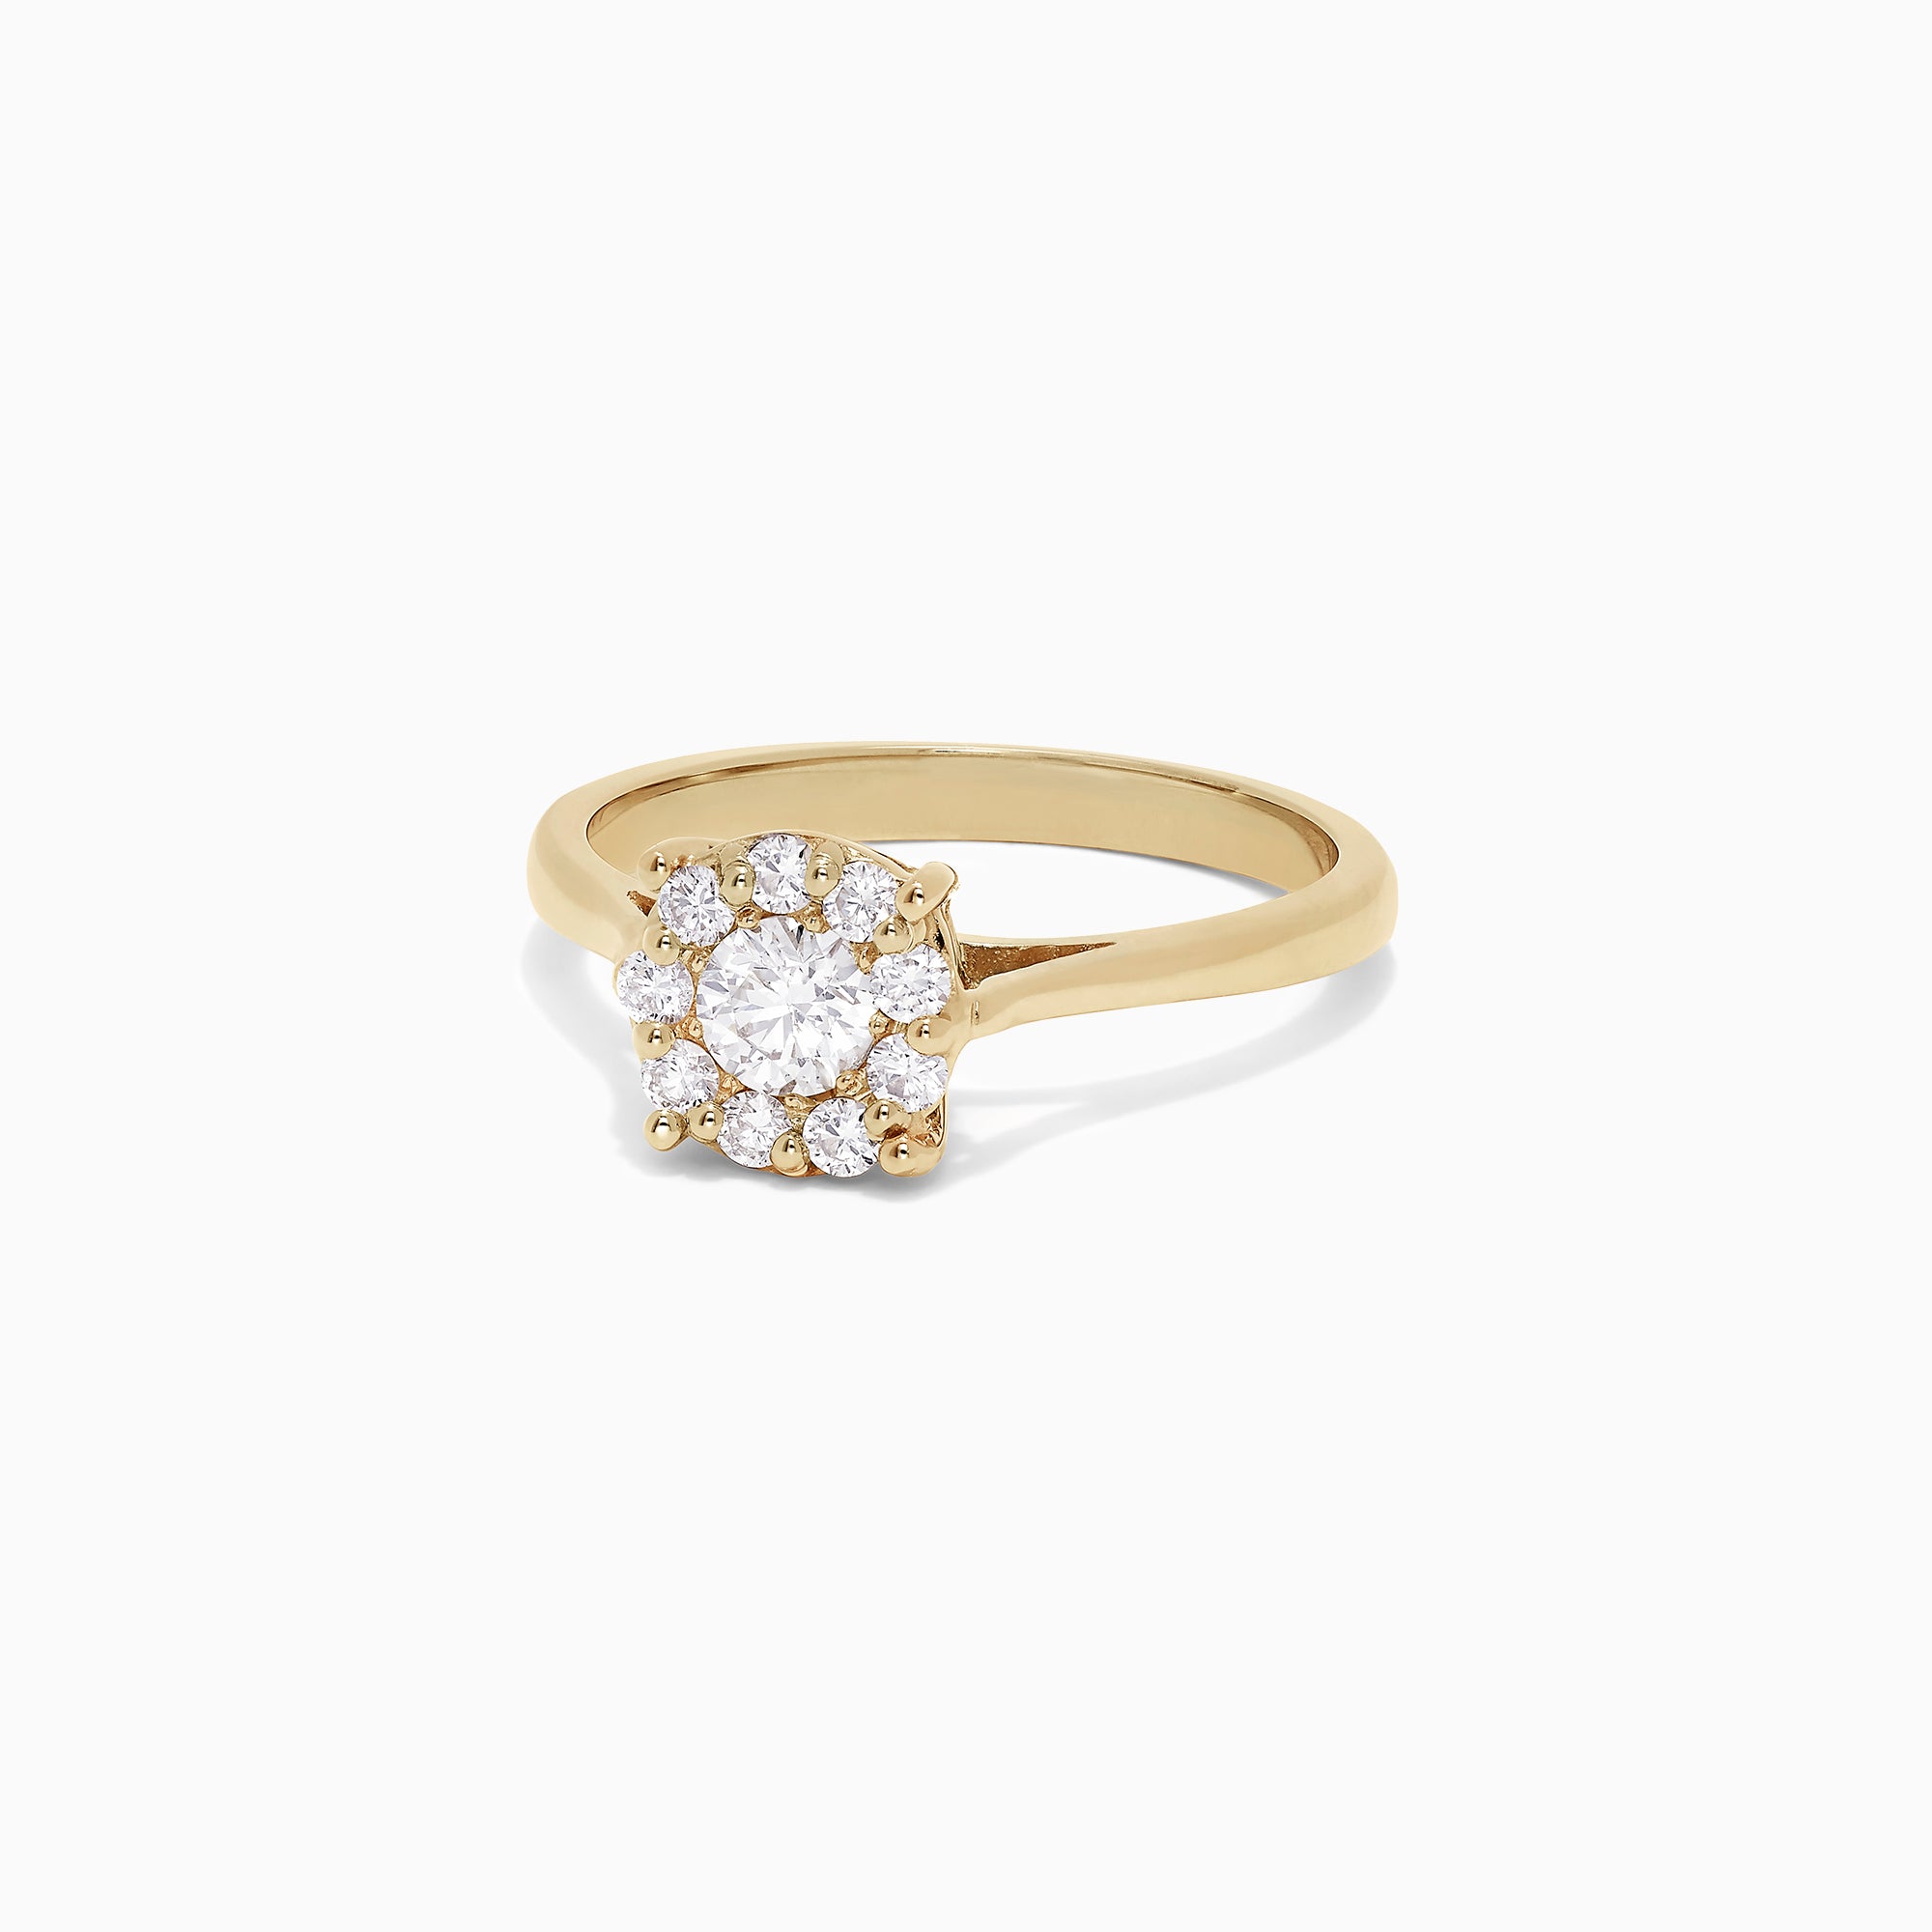 Bouquet 14K Yellow Gold Diamond Cluster Ring, 0.51 TCW